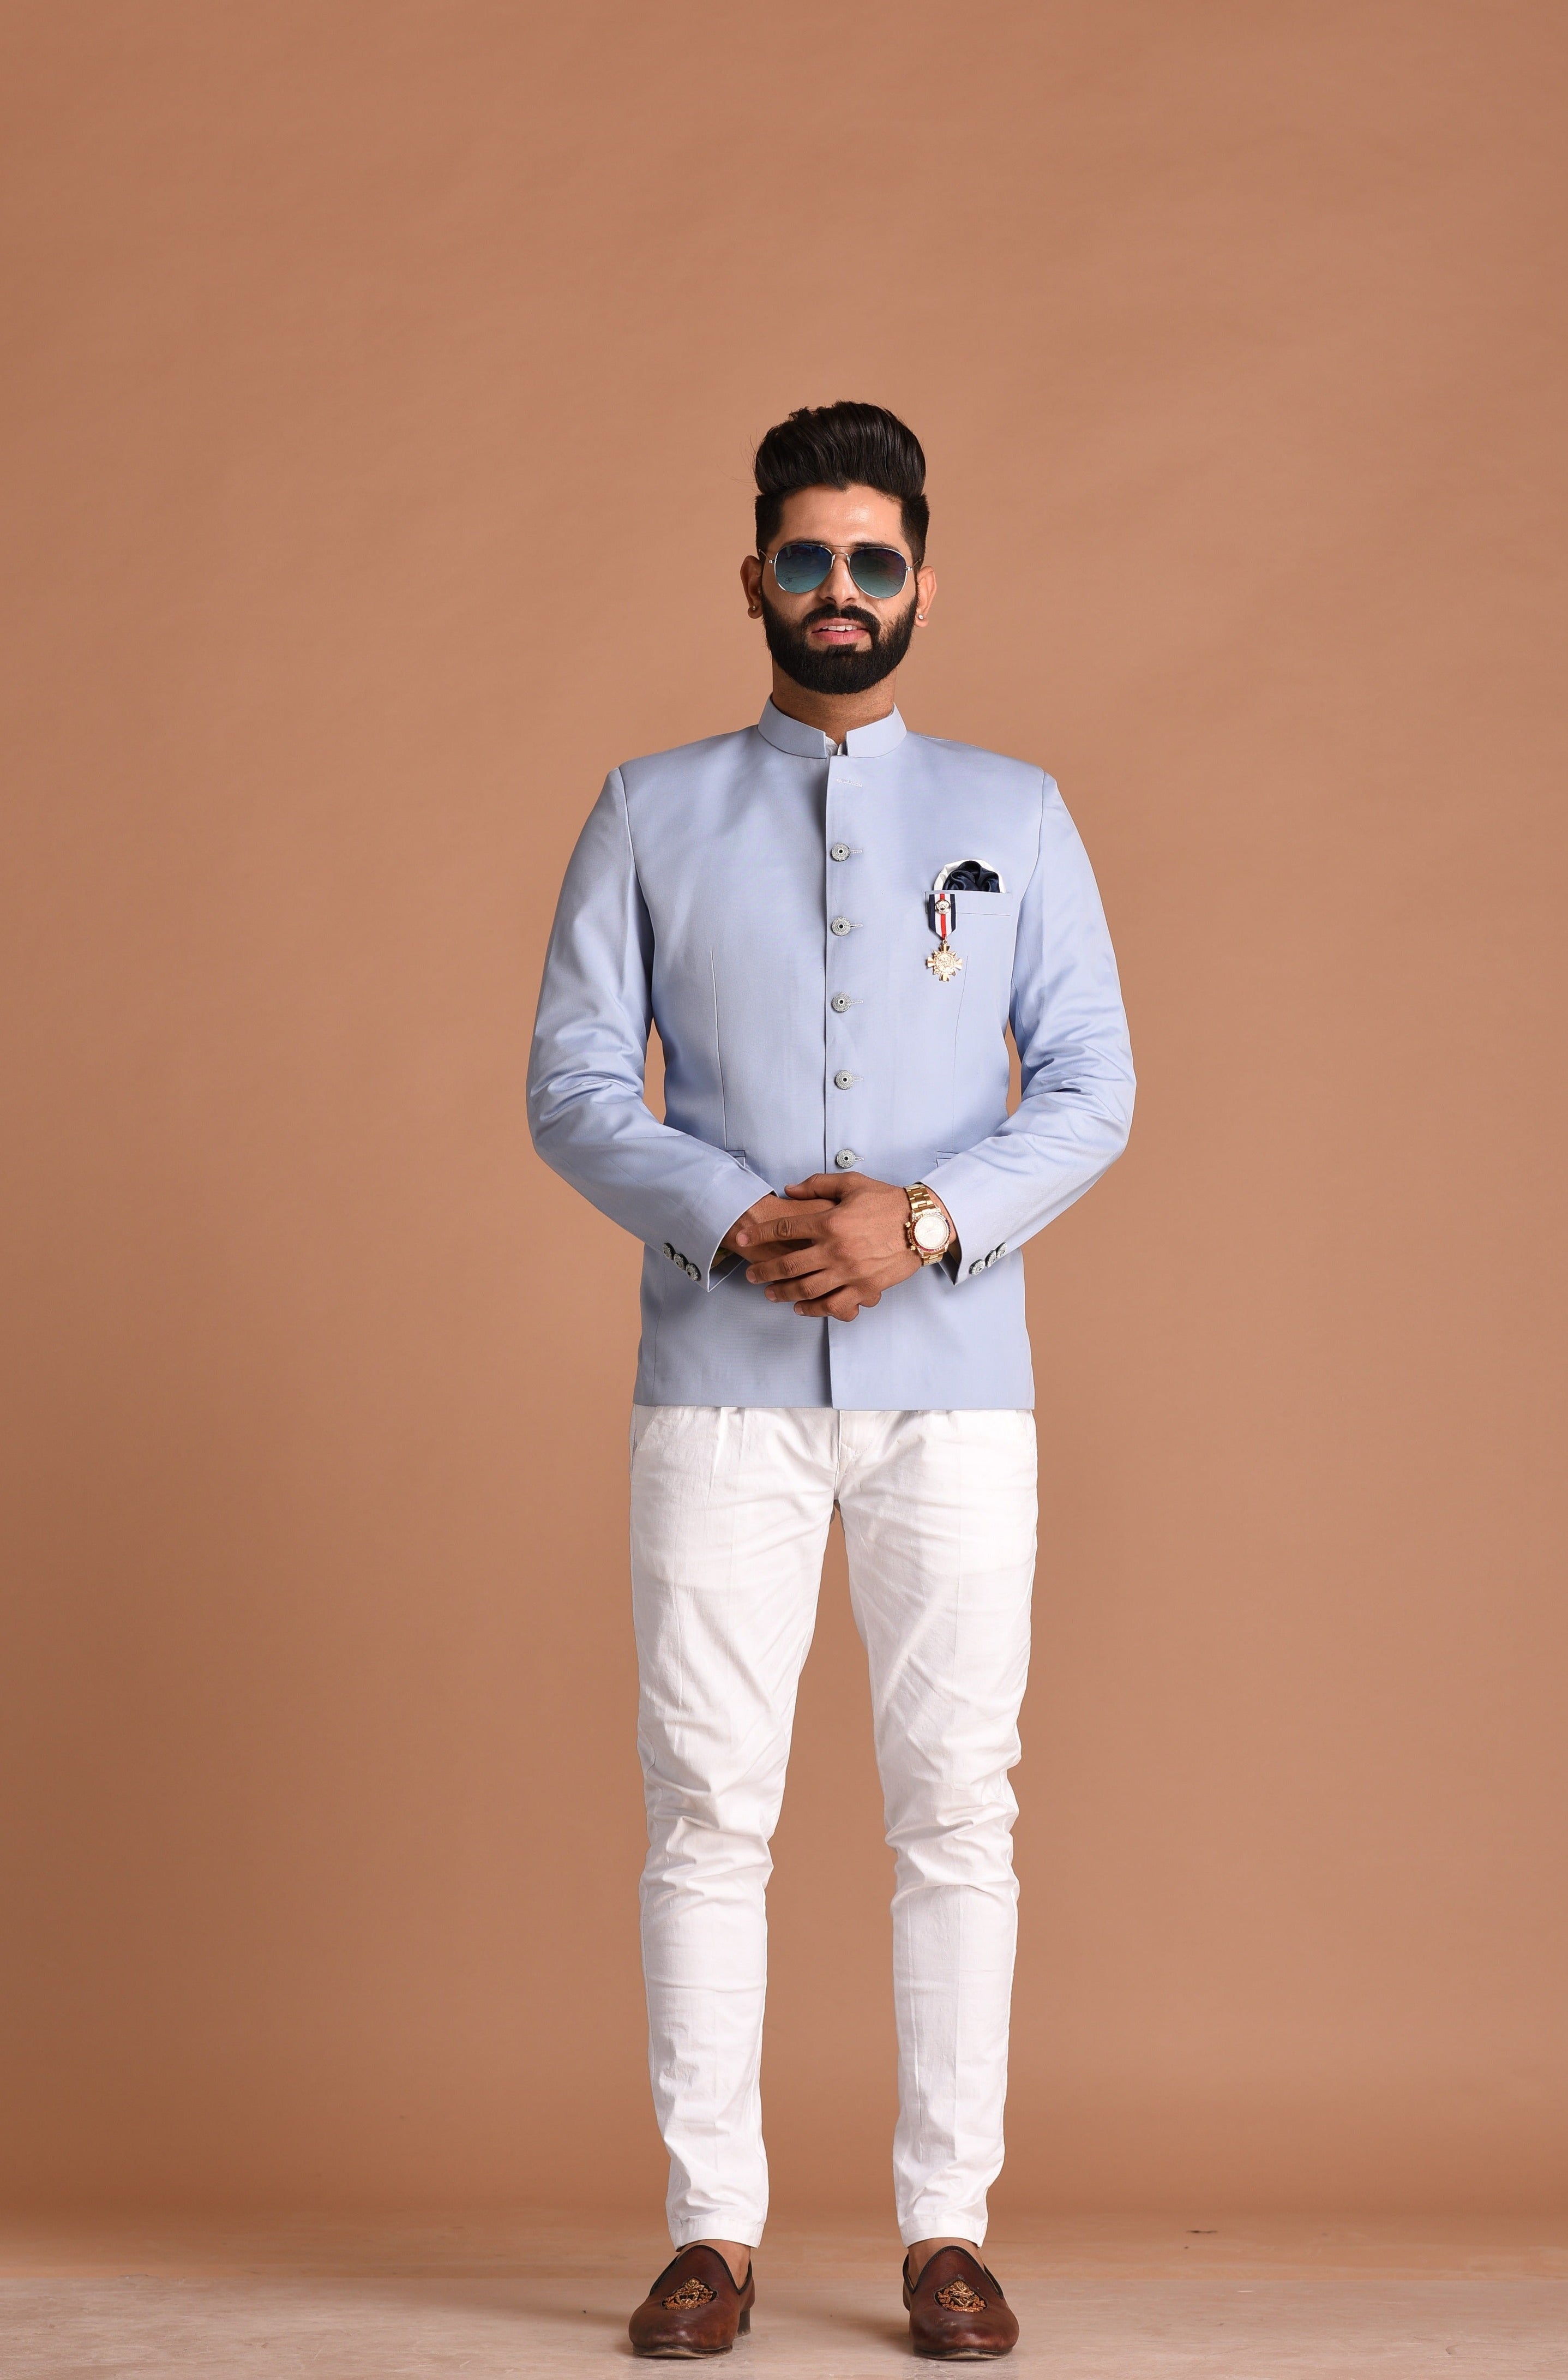 Alluring Cloud Blue Jodhpuri Bandhgala with White Trouser| Terry Rayon| Perfect for Formal Party Wear for Open and Daylight Functions | Youth Inspired